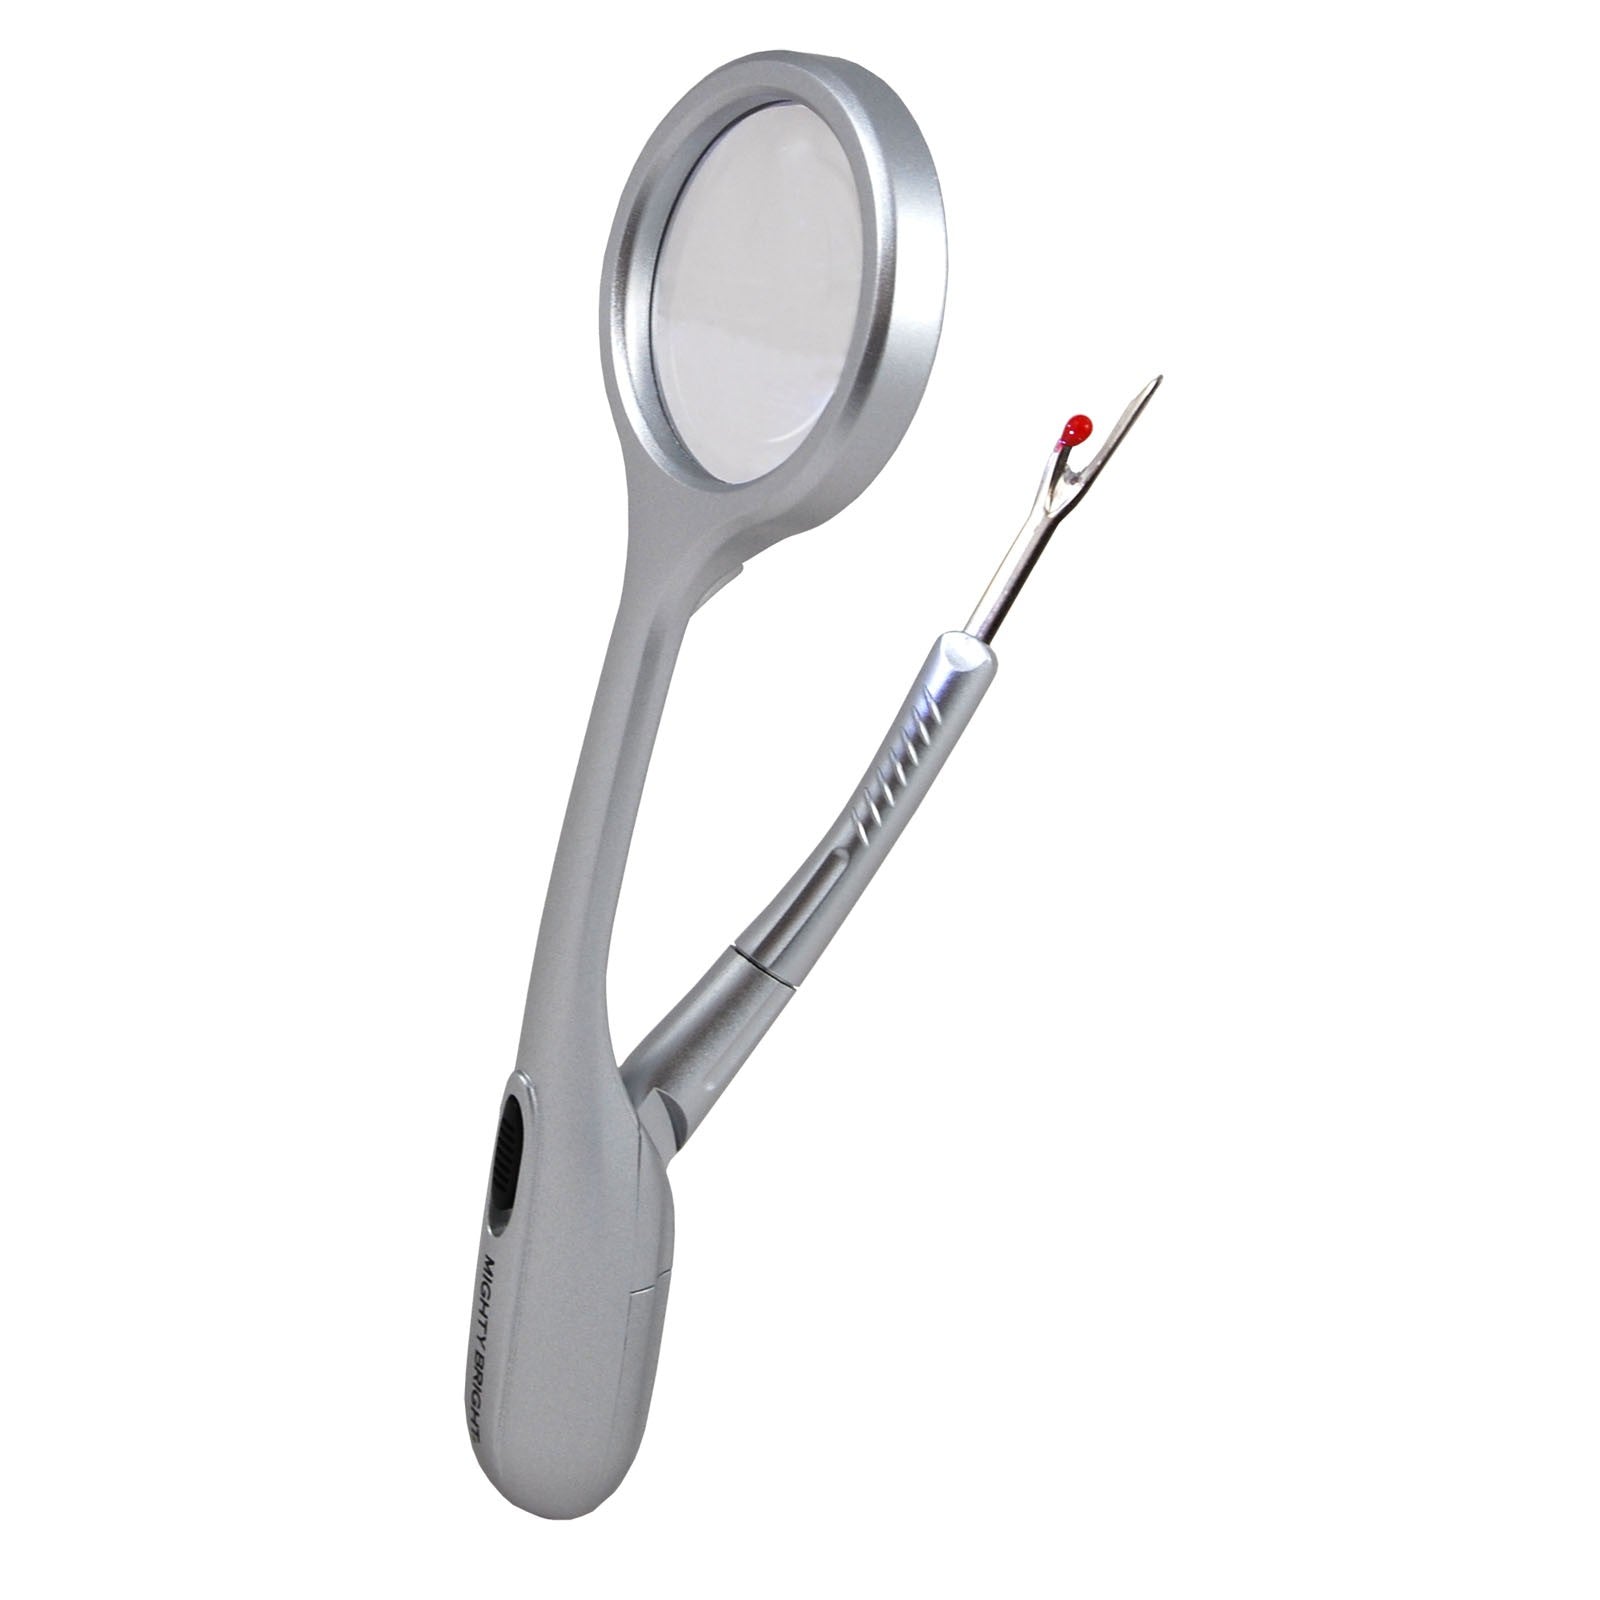 Mighty Bright LED Lighted Seam Ripper w/ Magnifier